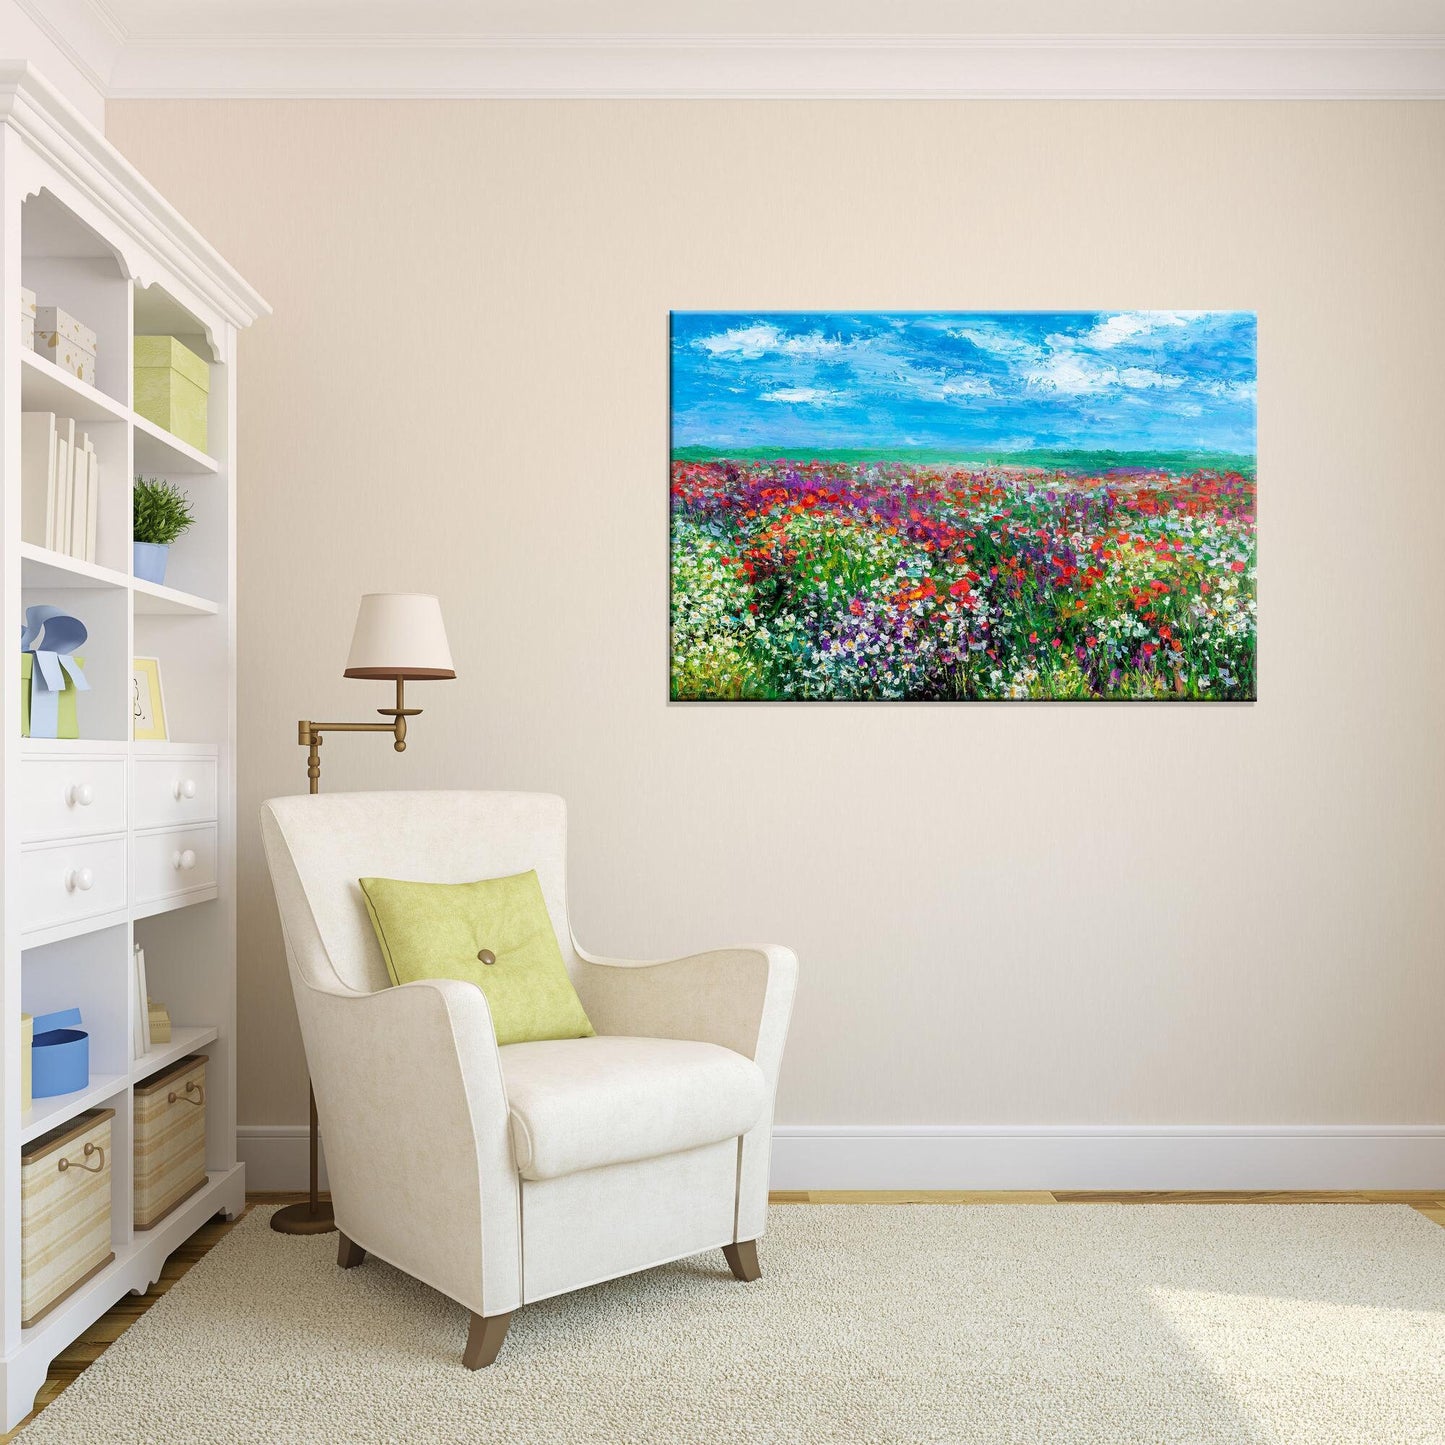 Oil Painting Landscape Spring Flowers, Bring the Beauty of the Outdoors Indoors with an Original Oil Painting by George Miller